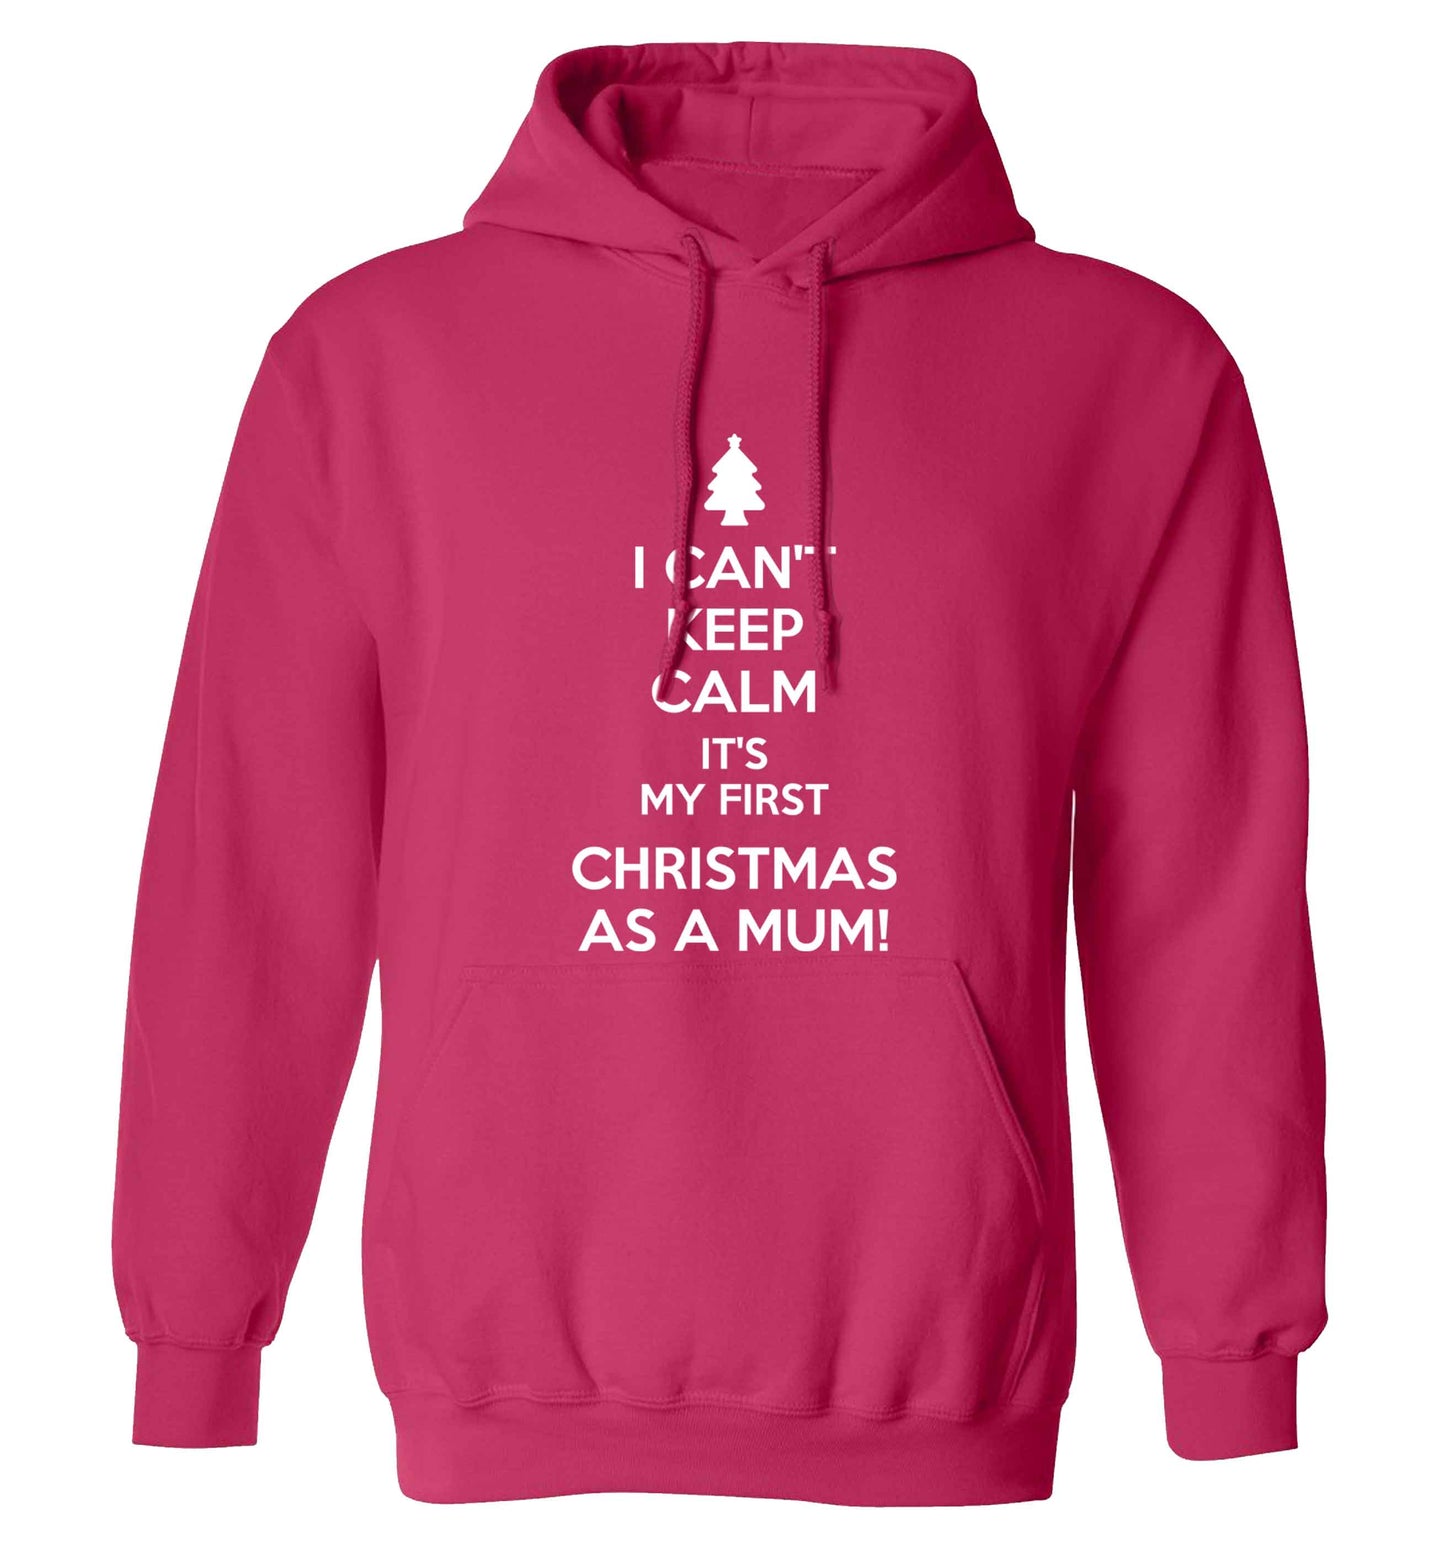 I can't keep calm it's my first Christmas as a mum adults unisex pink hoodie 2XL